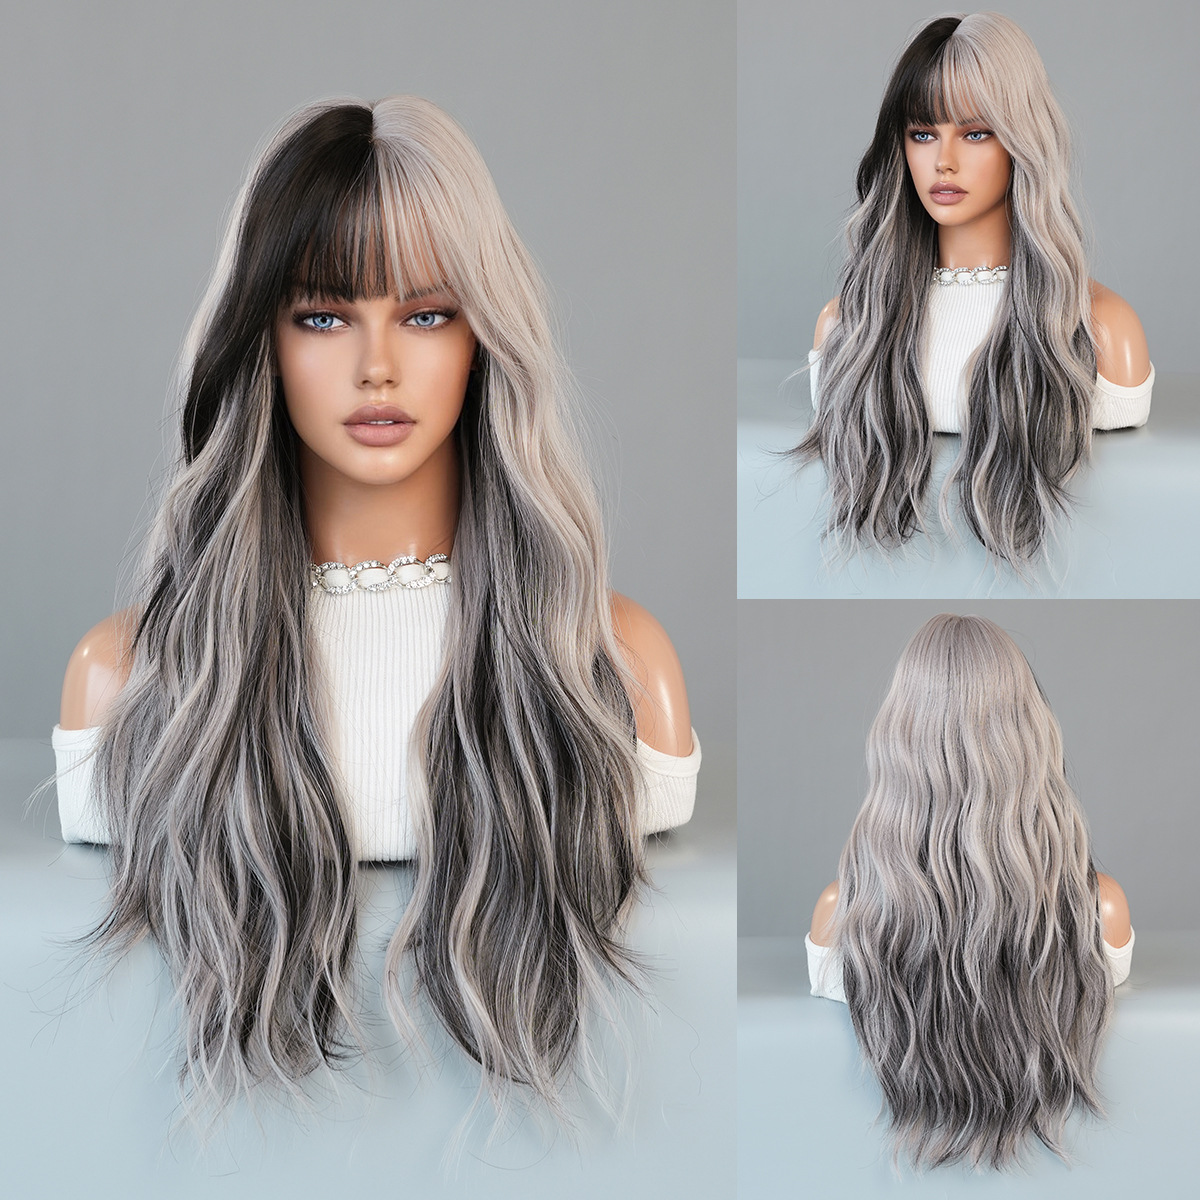 A fashionable synthetic wig with long wavy hair in brown highlights and bangs, ready for a party